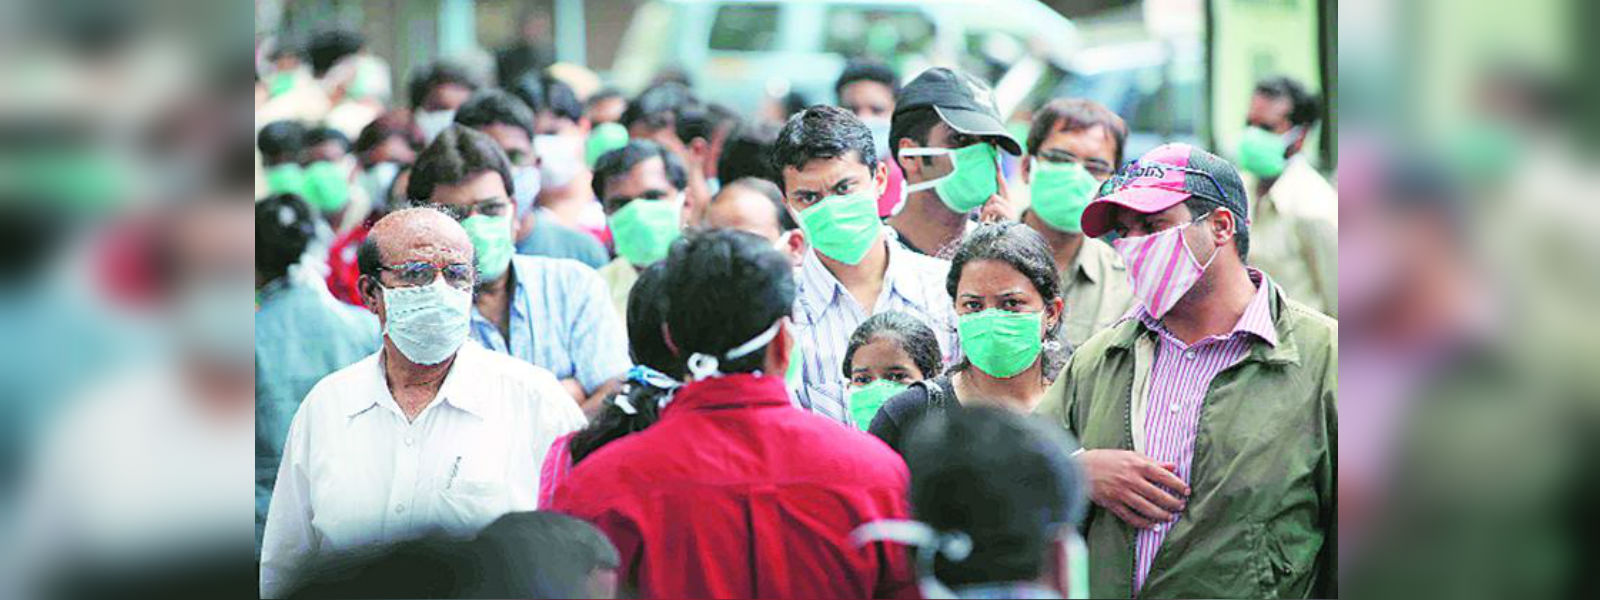 Swine flu claims 14 lives in Indian farm state